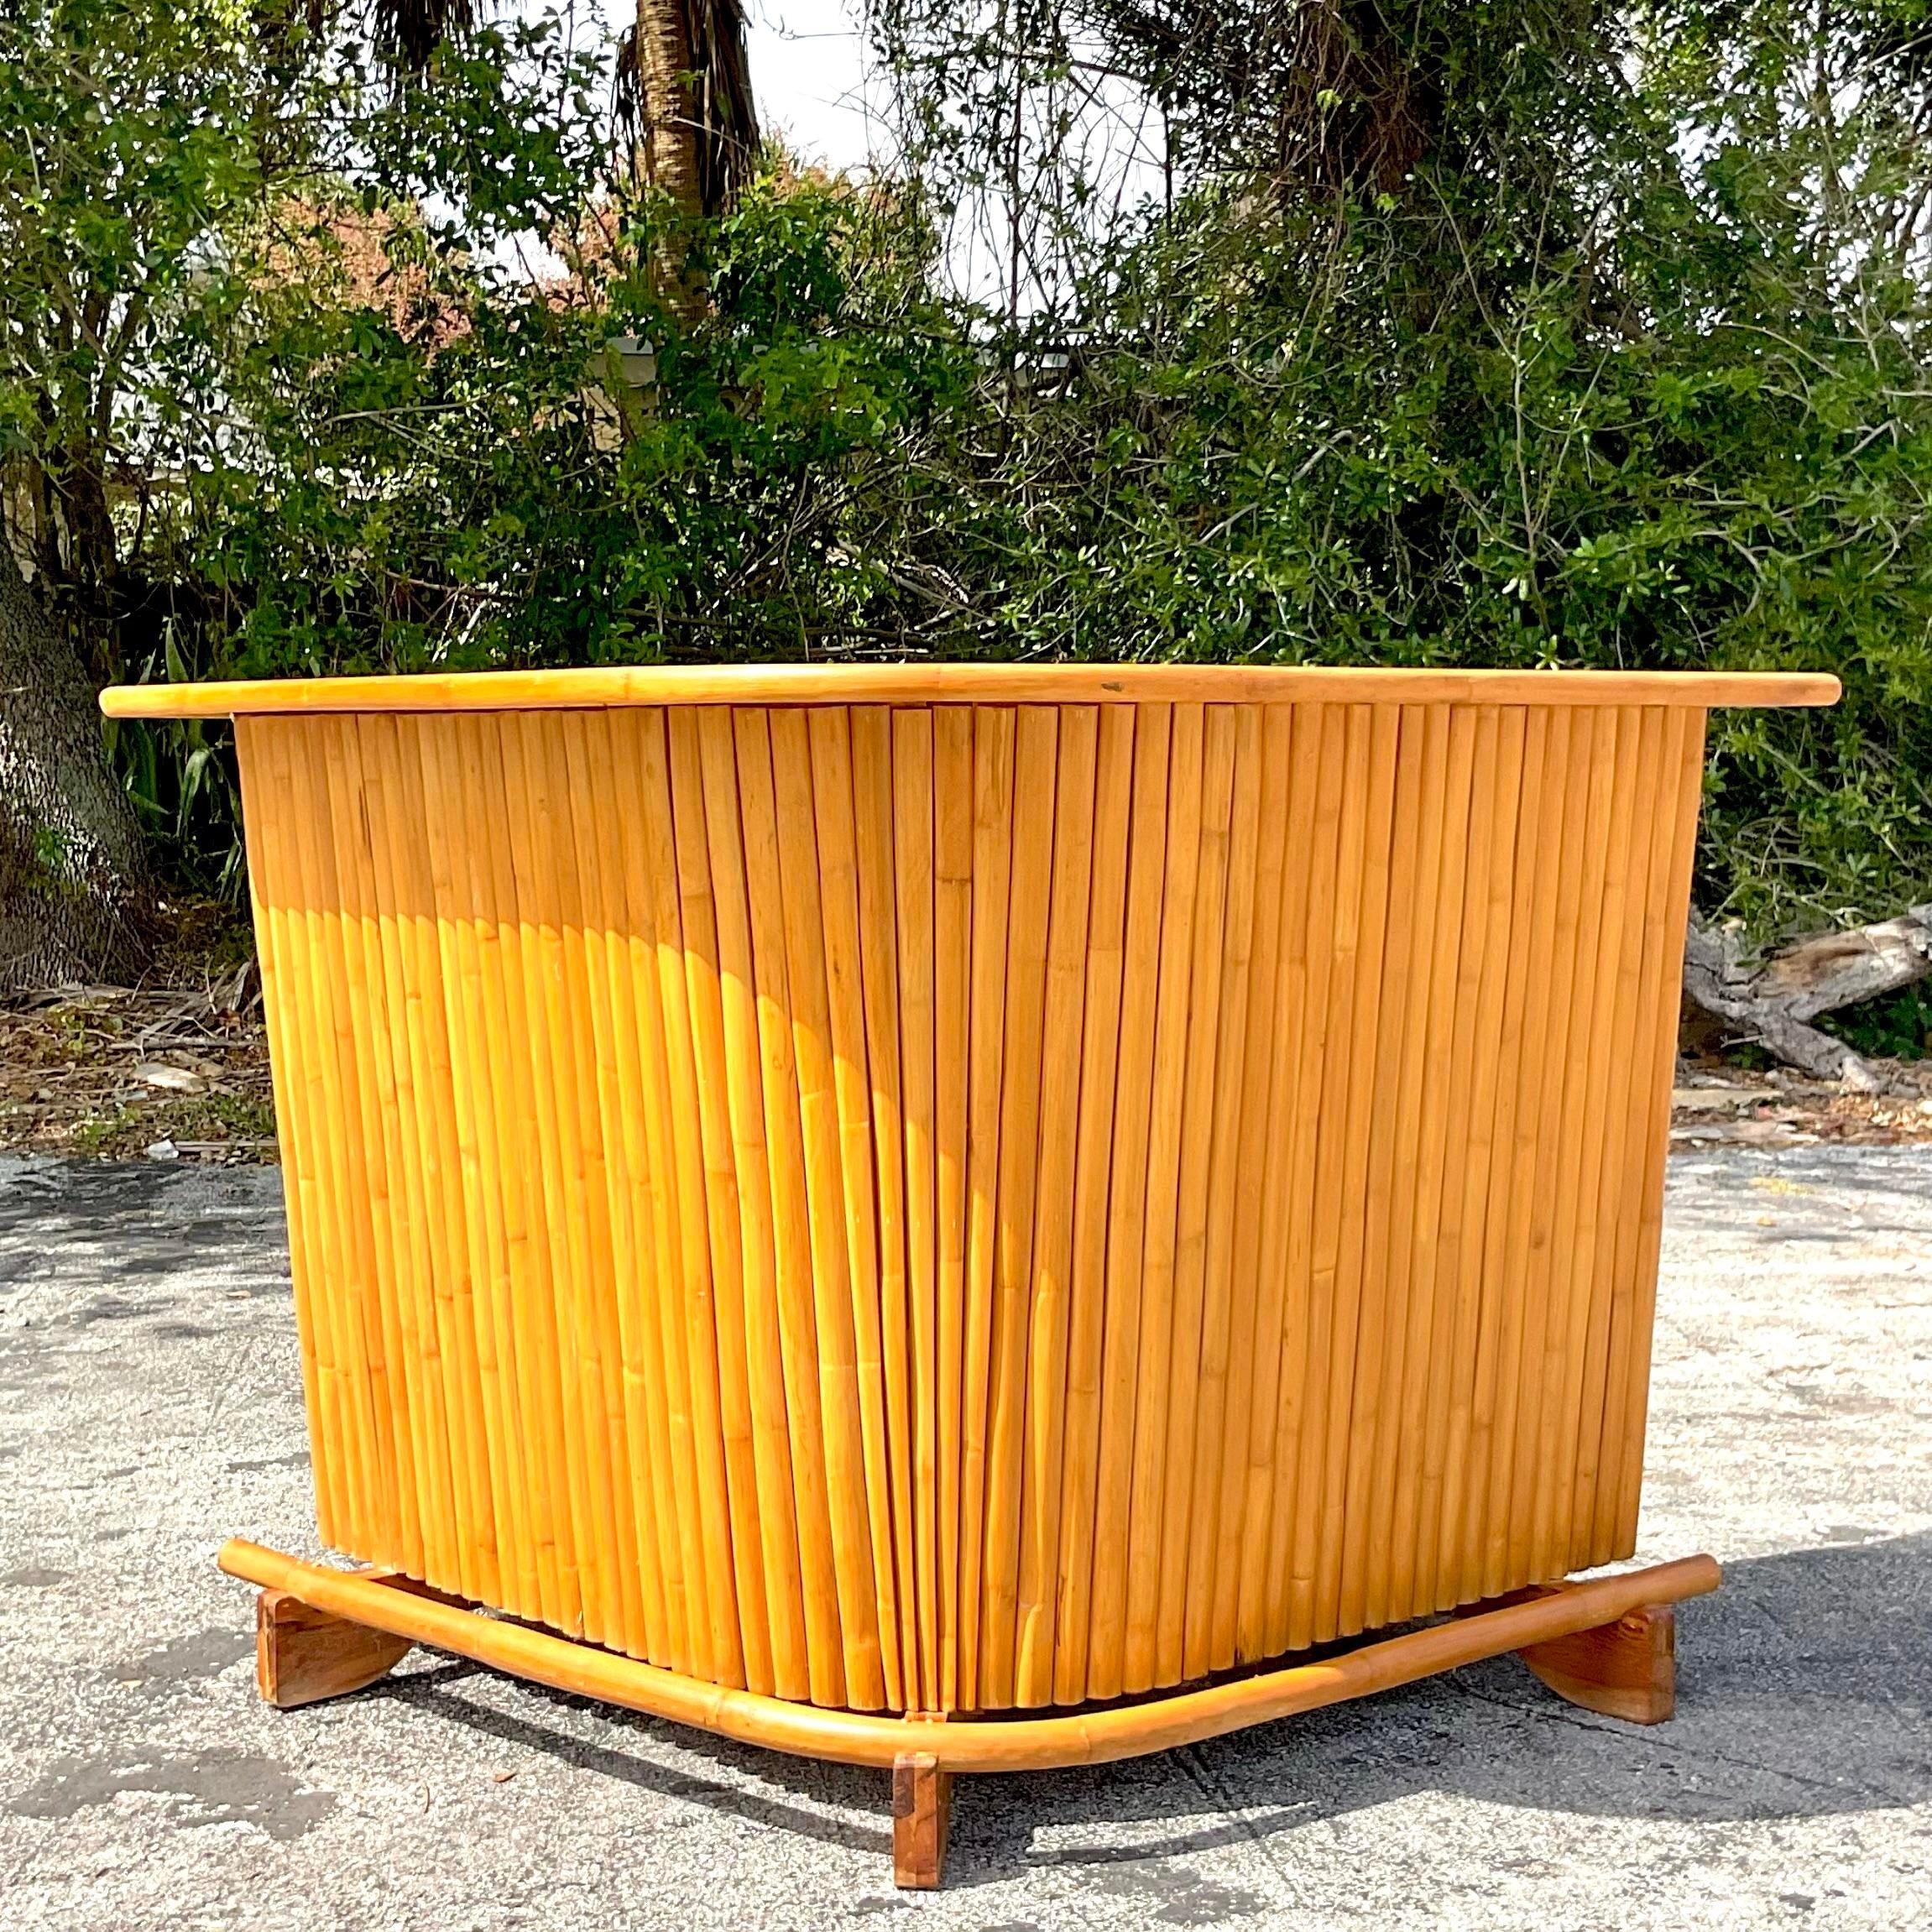 A fantastic vintage Coastal dry bar. A chic thick rattan in a cool retro boomerang shape. Laminate wood top for easy care. Lots of great storage below. Acquired from a Palm Beach estate.